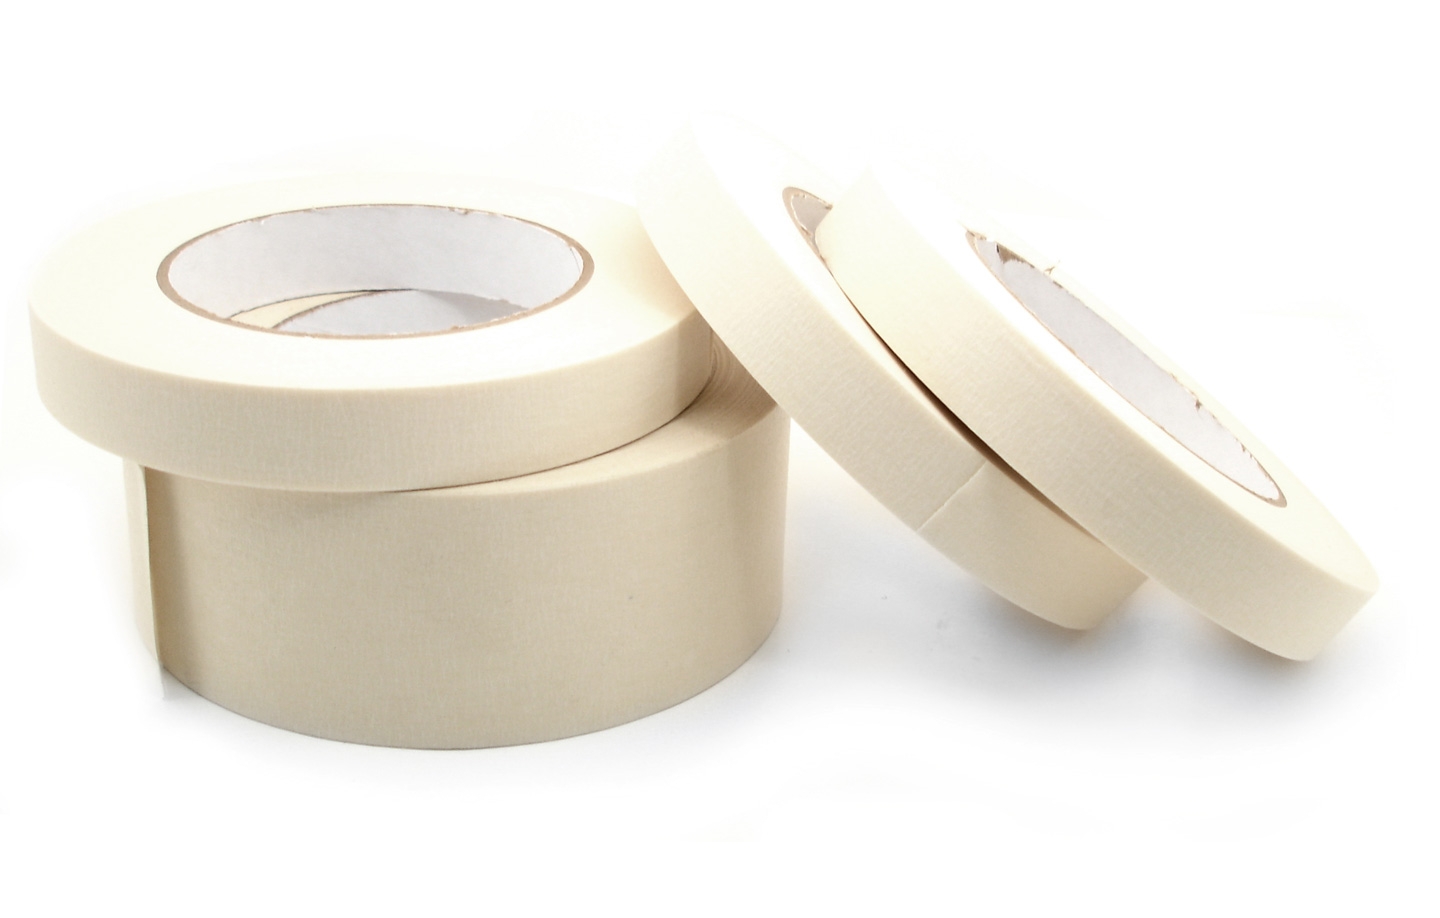 Sticky Thumb Low Tack Mask Tape 11 Yards-4